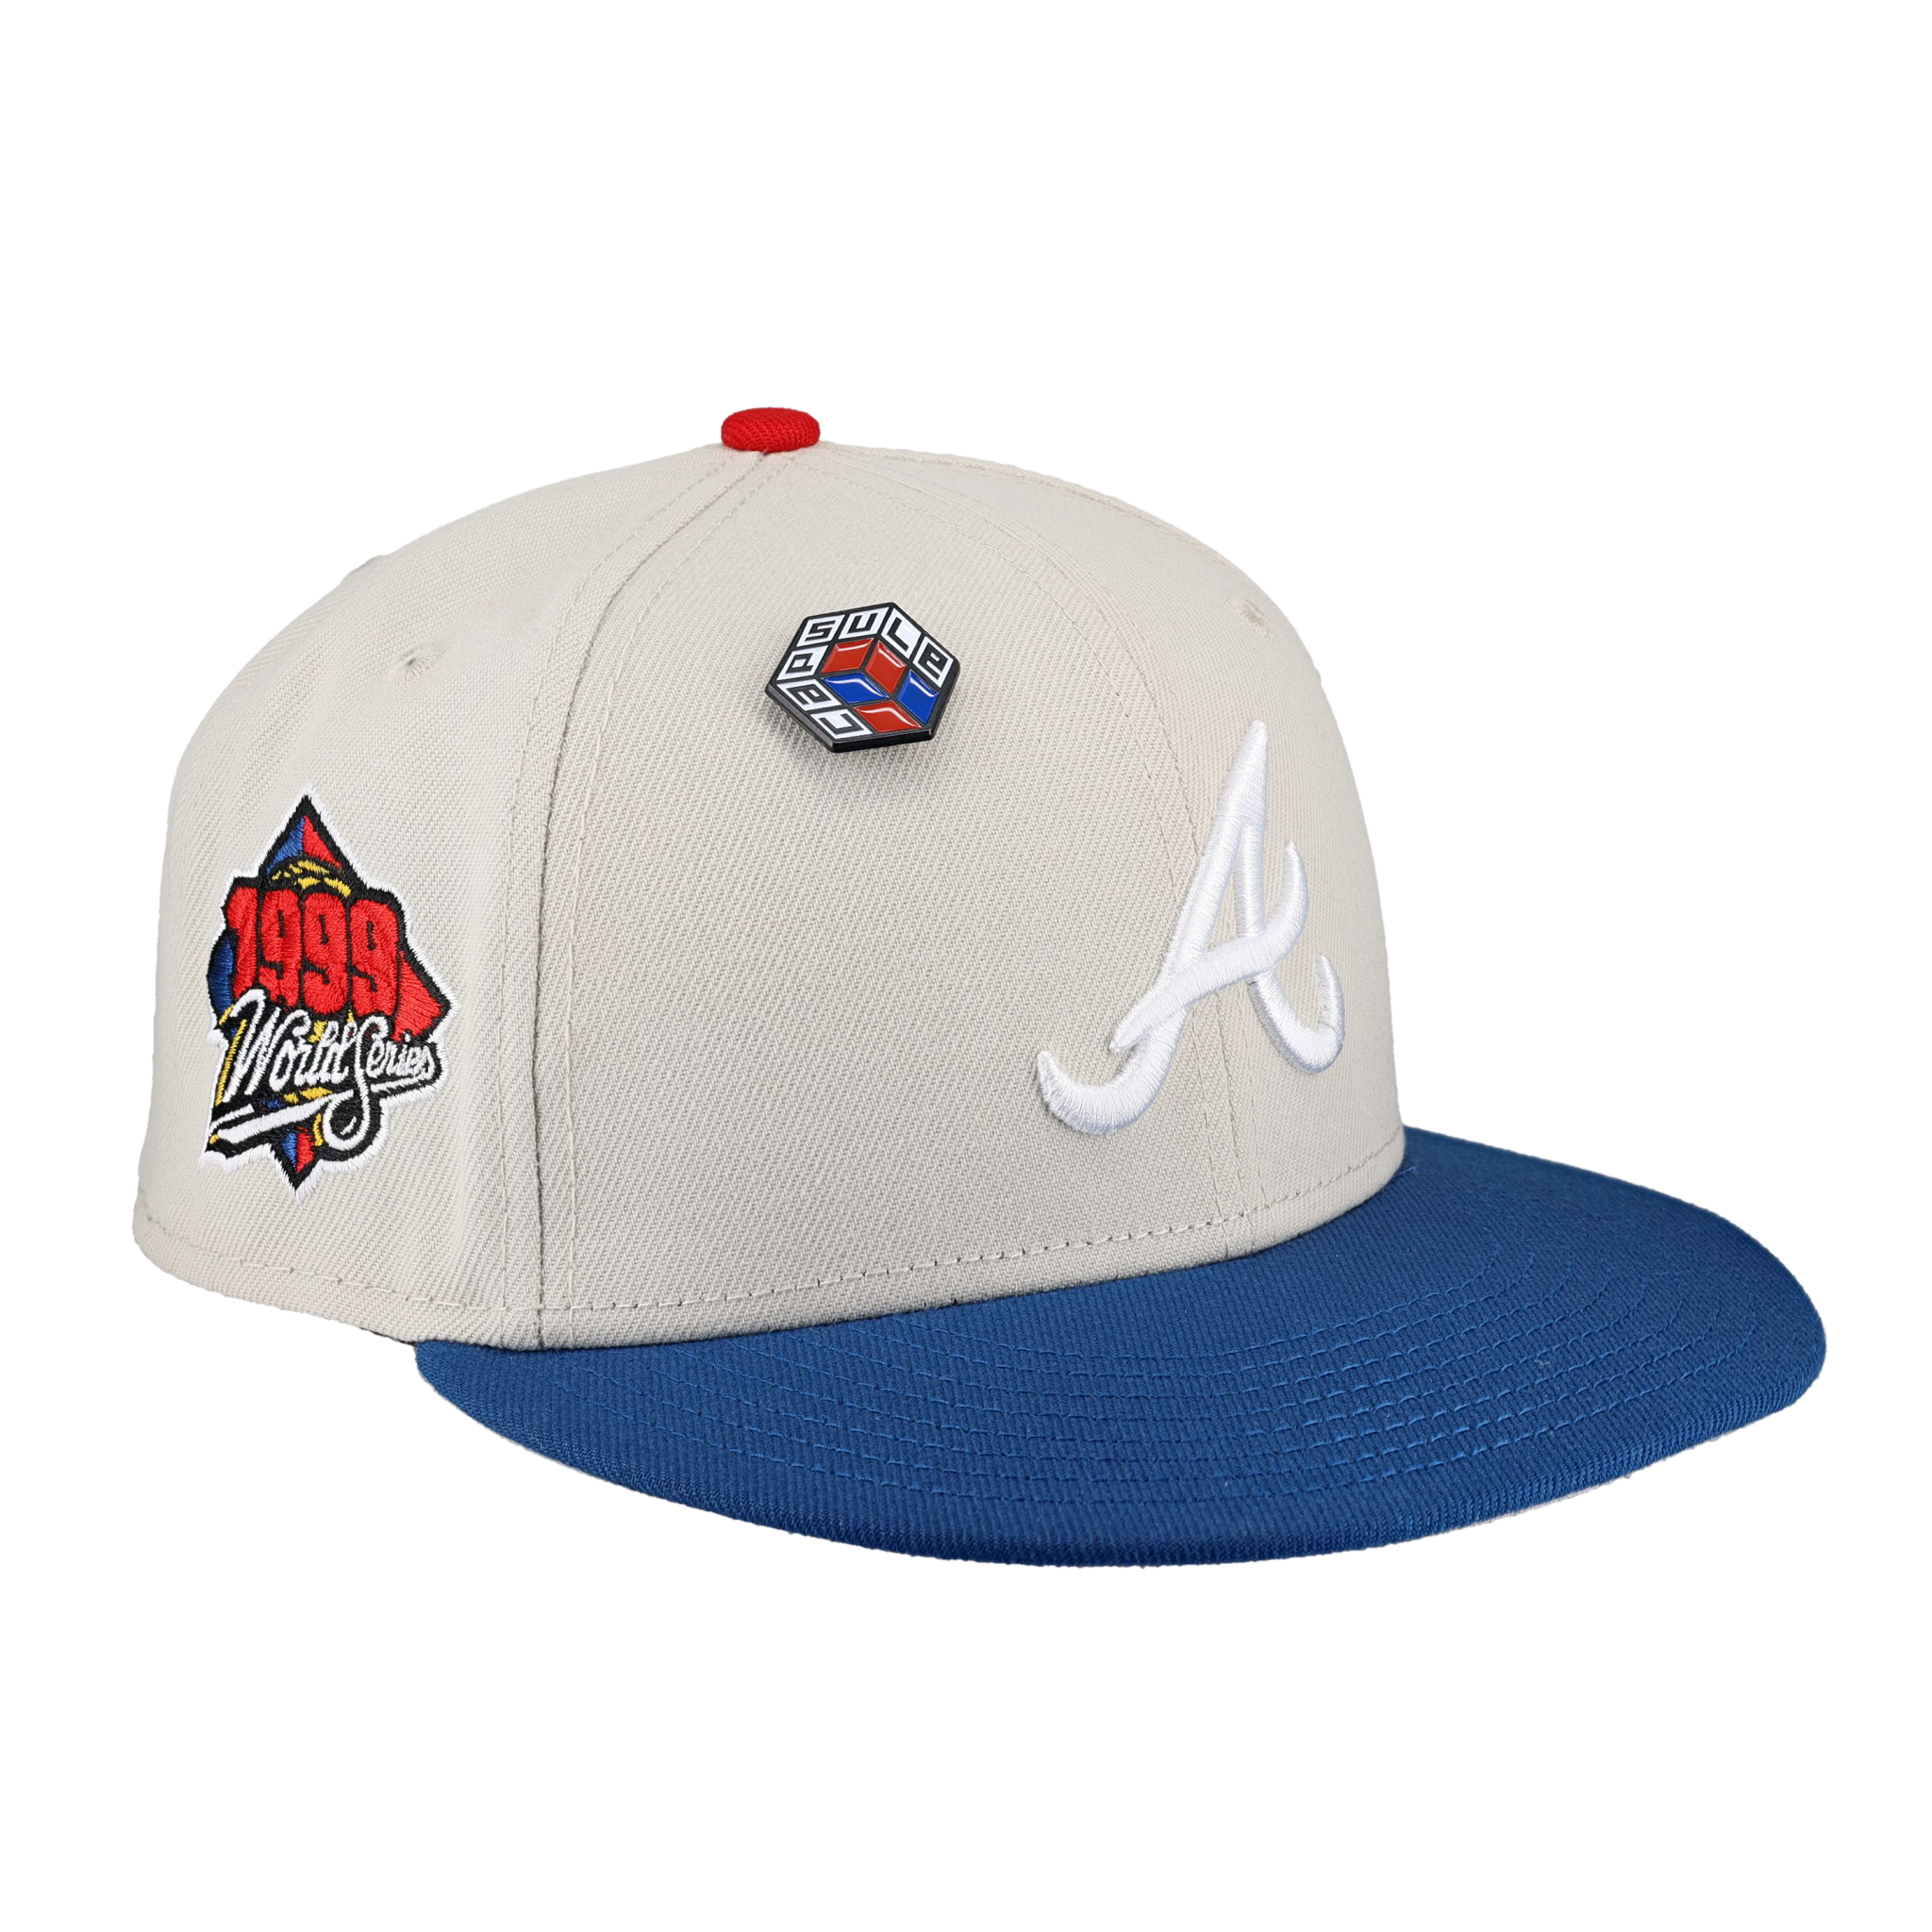 Atlanta Braves Cube Collection 1999 World Series Fitted Hat – CapsuleHats